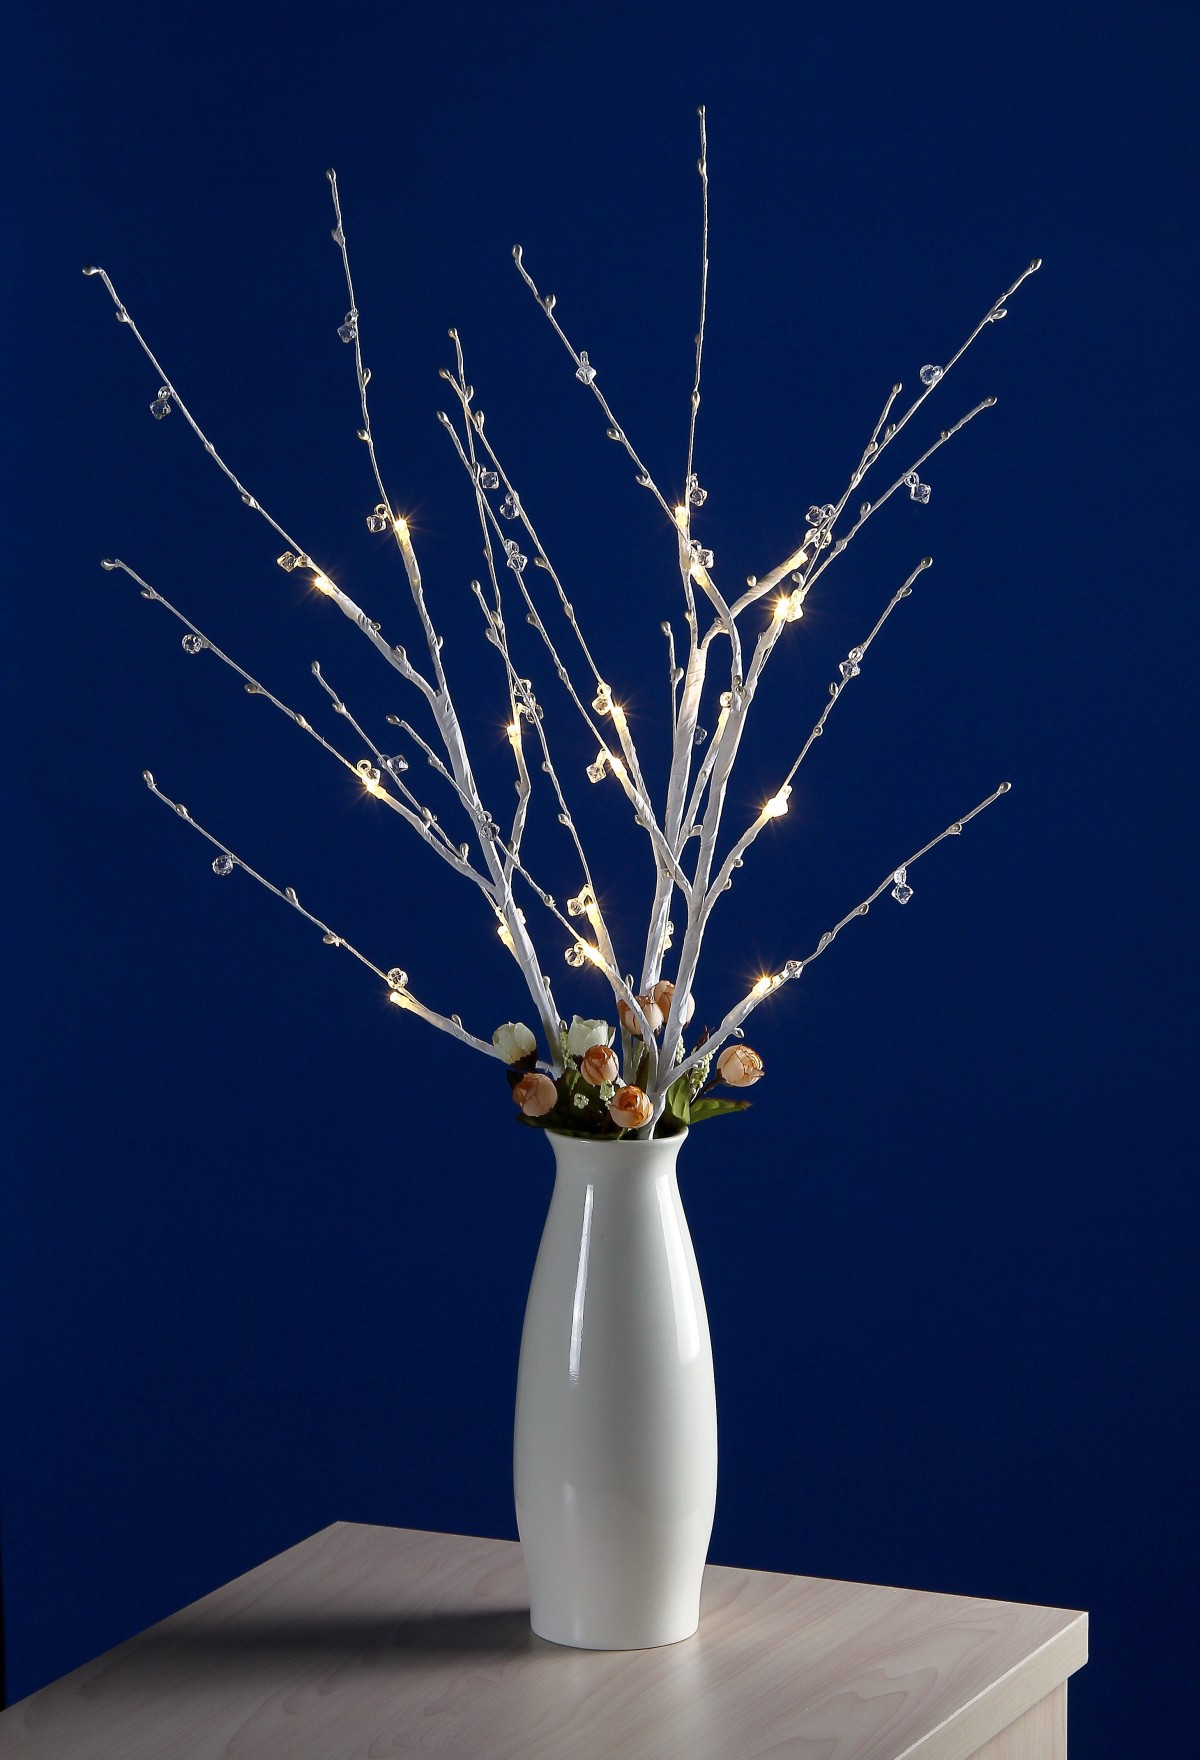 21 Stylish Light Up Branches for Vase 2024 free download light up branches for vase of free images tree branch blossom winter leaf frost ice with regard to branch white flower vase blue lighting